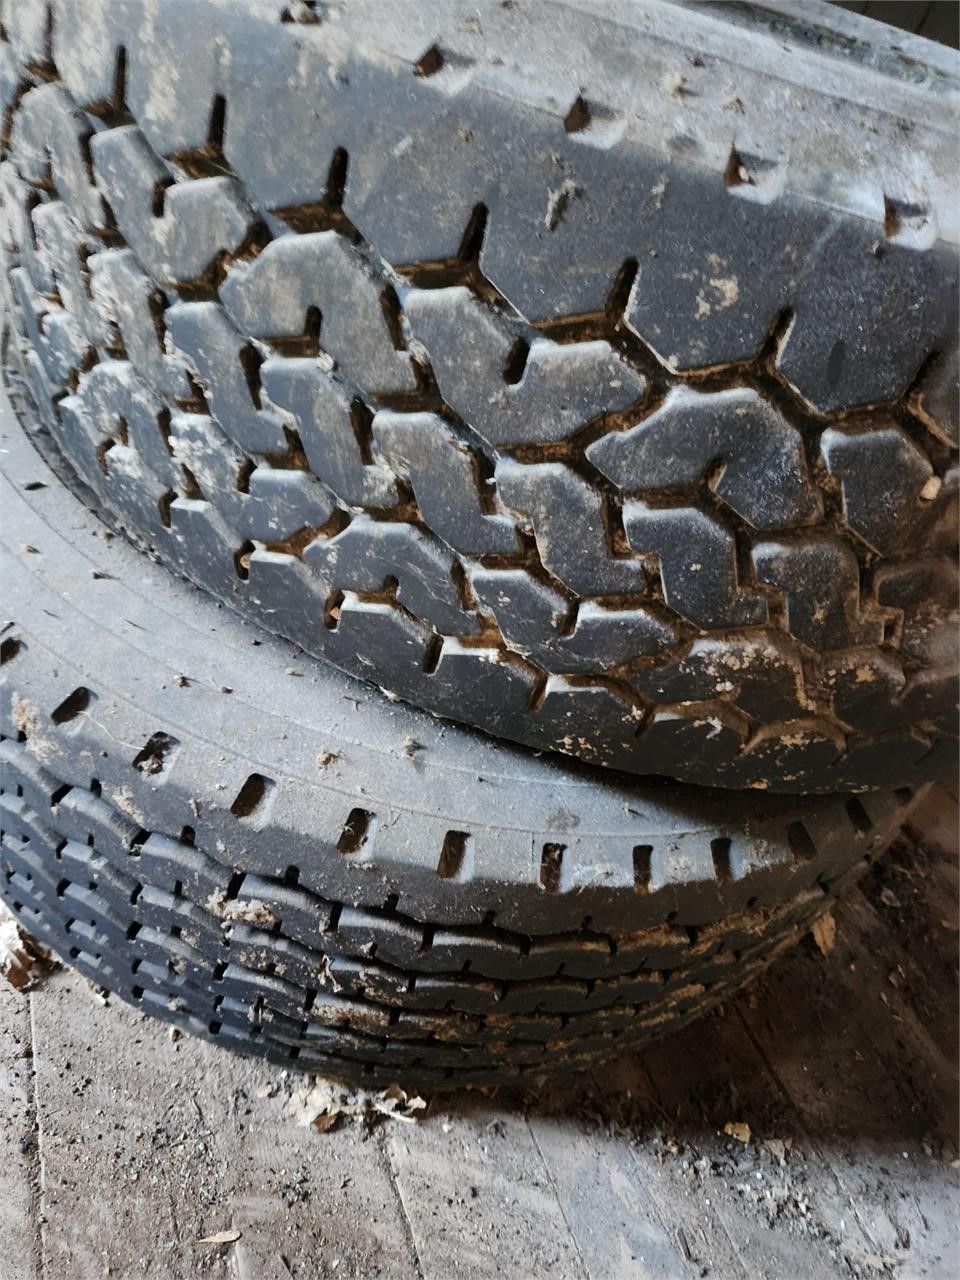 2 Very Large Truck Tires, includes a 3rd tire that